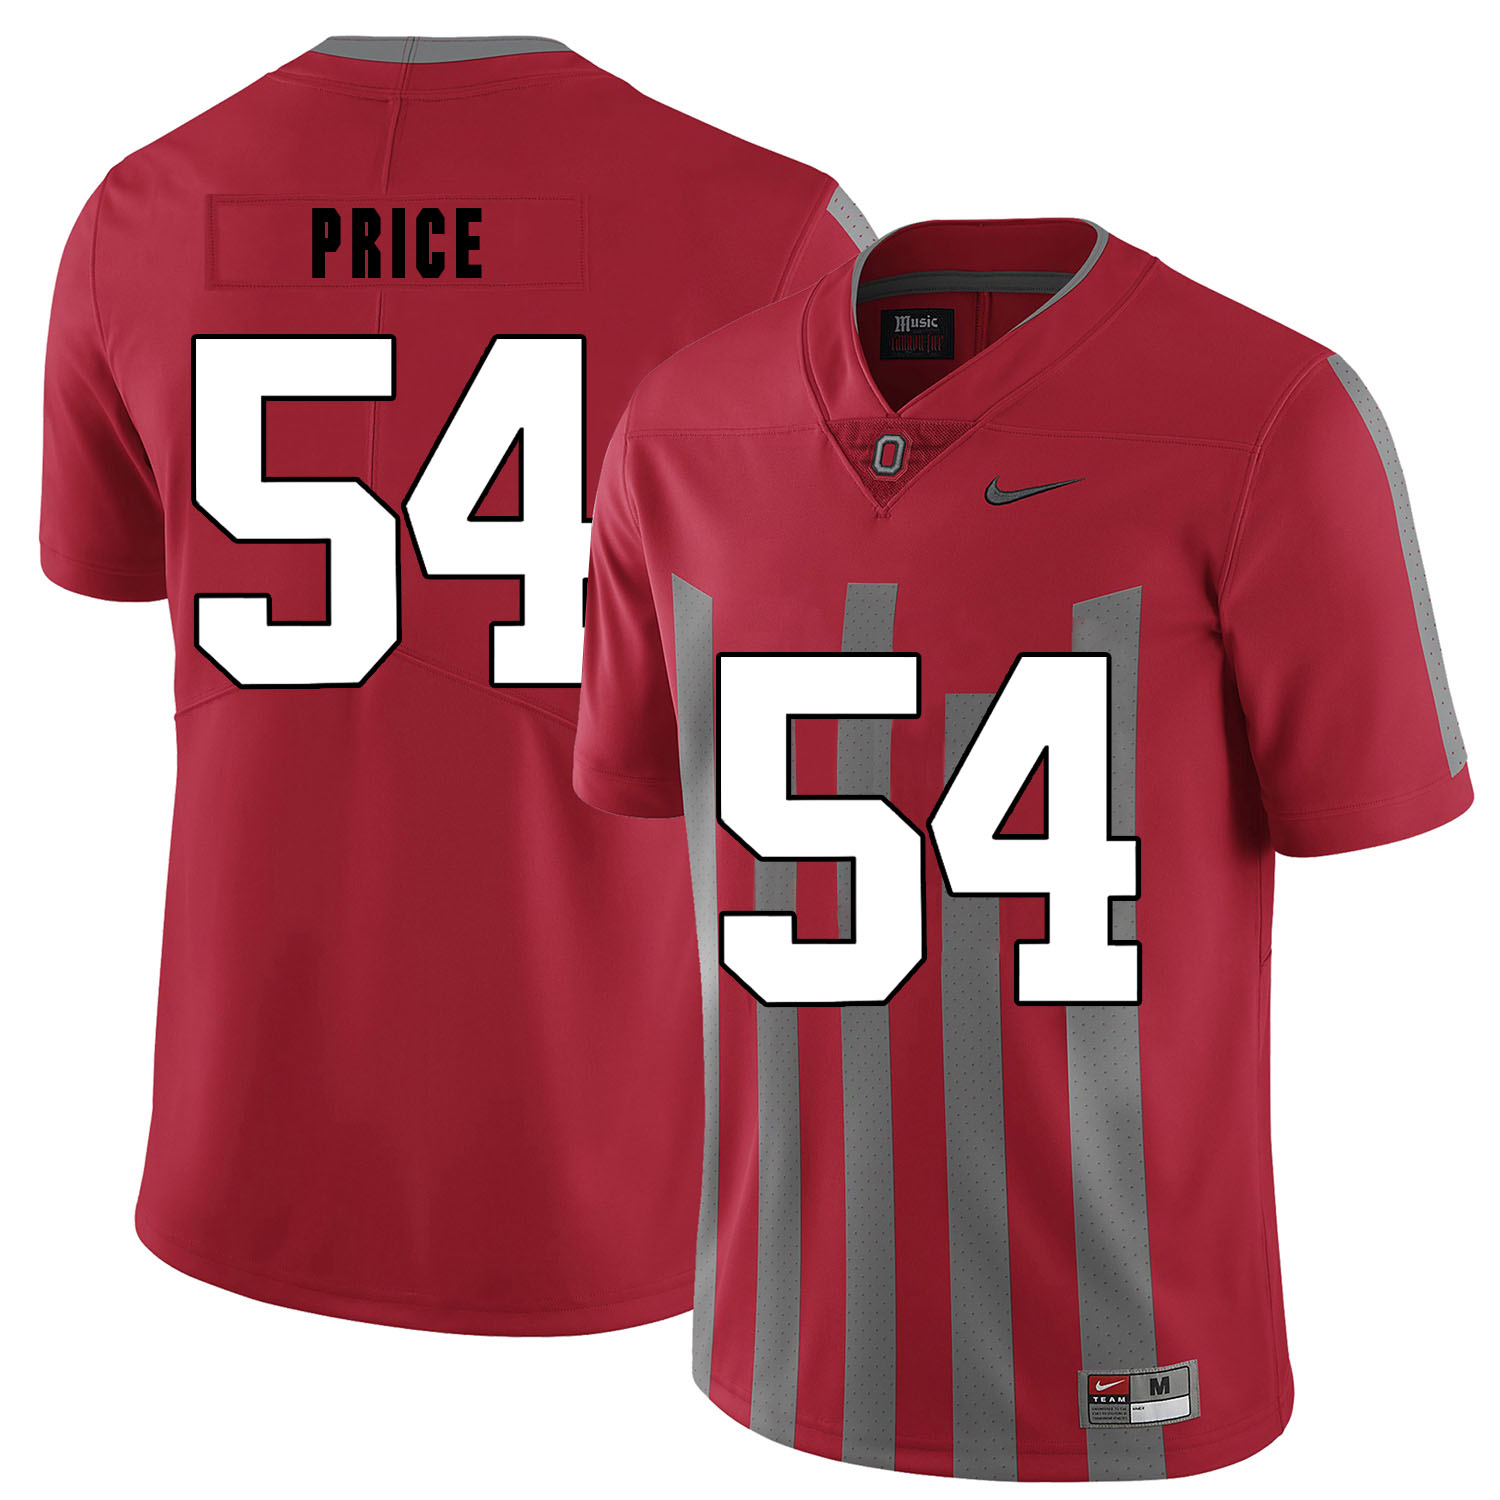 Ohio State Buckeyes 54 Billy Price Red Elite Nike College Football Jersey